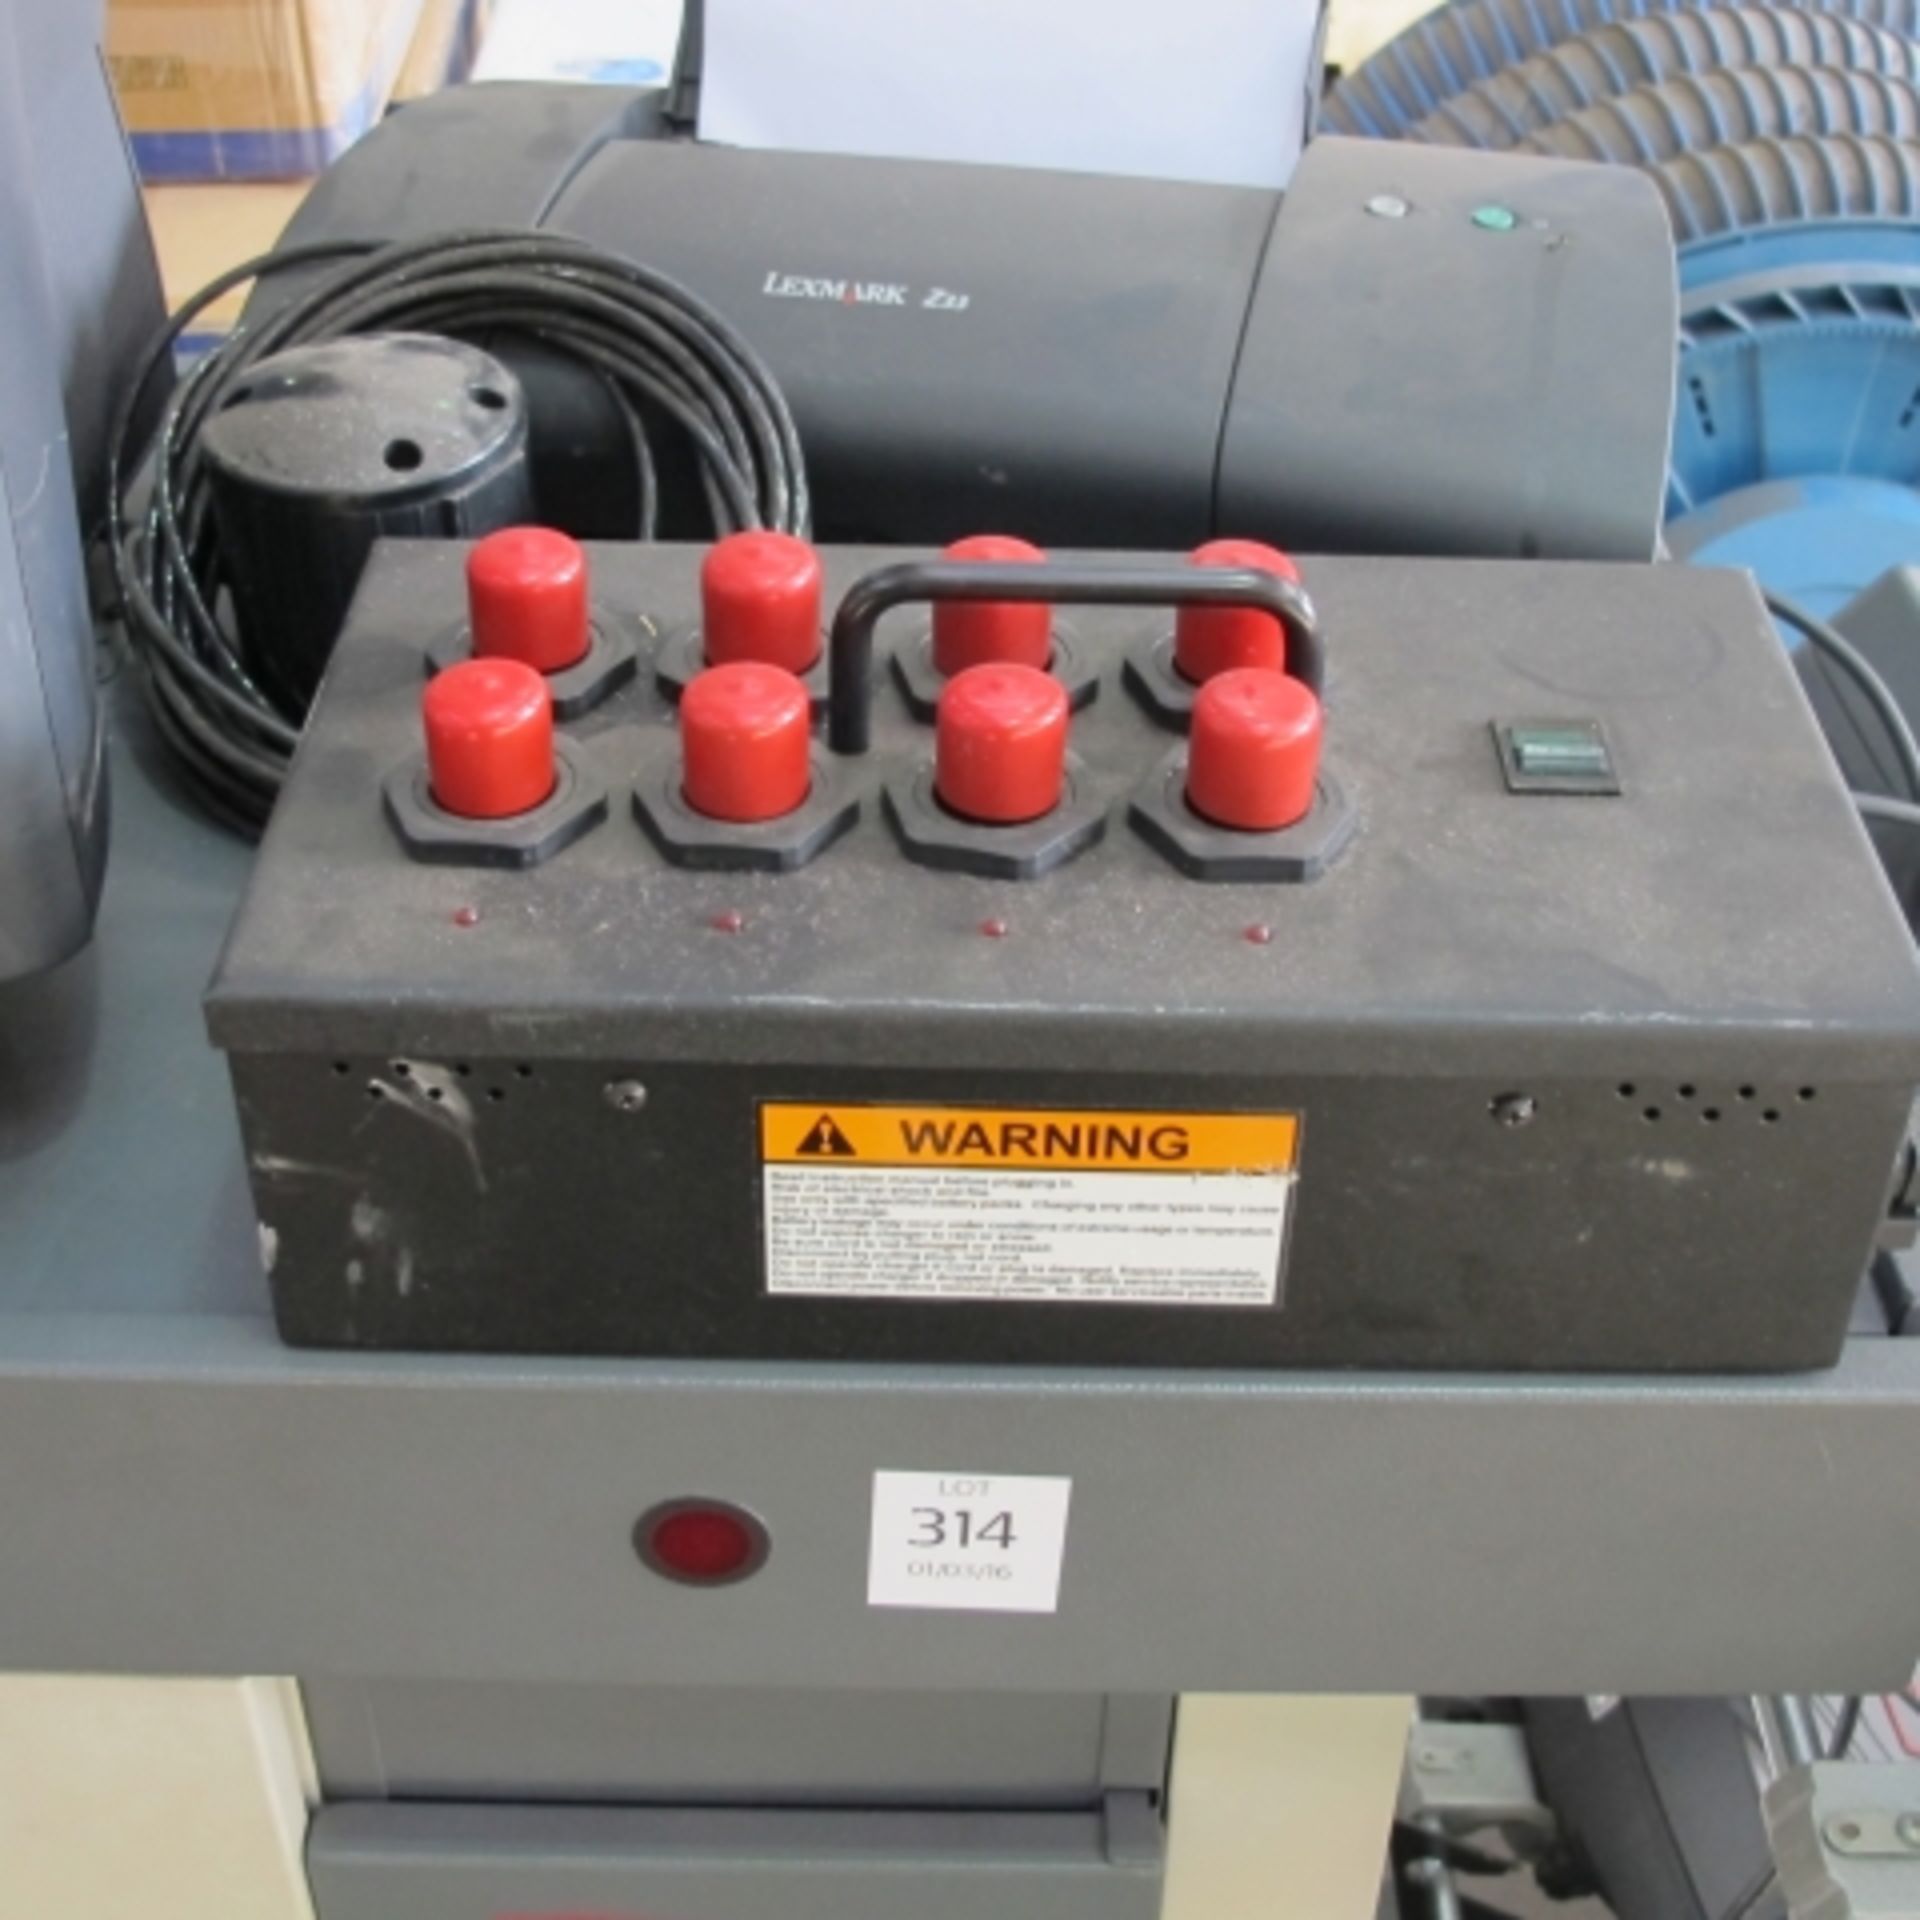 * A 2002-SUN 3500 4 wheel laser alignment machine. Please note there is a £5 plus VAT Lift Out Fee - Image 8 of 8